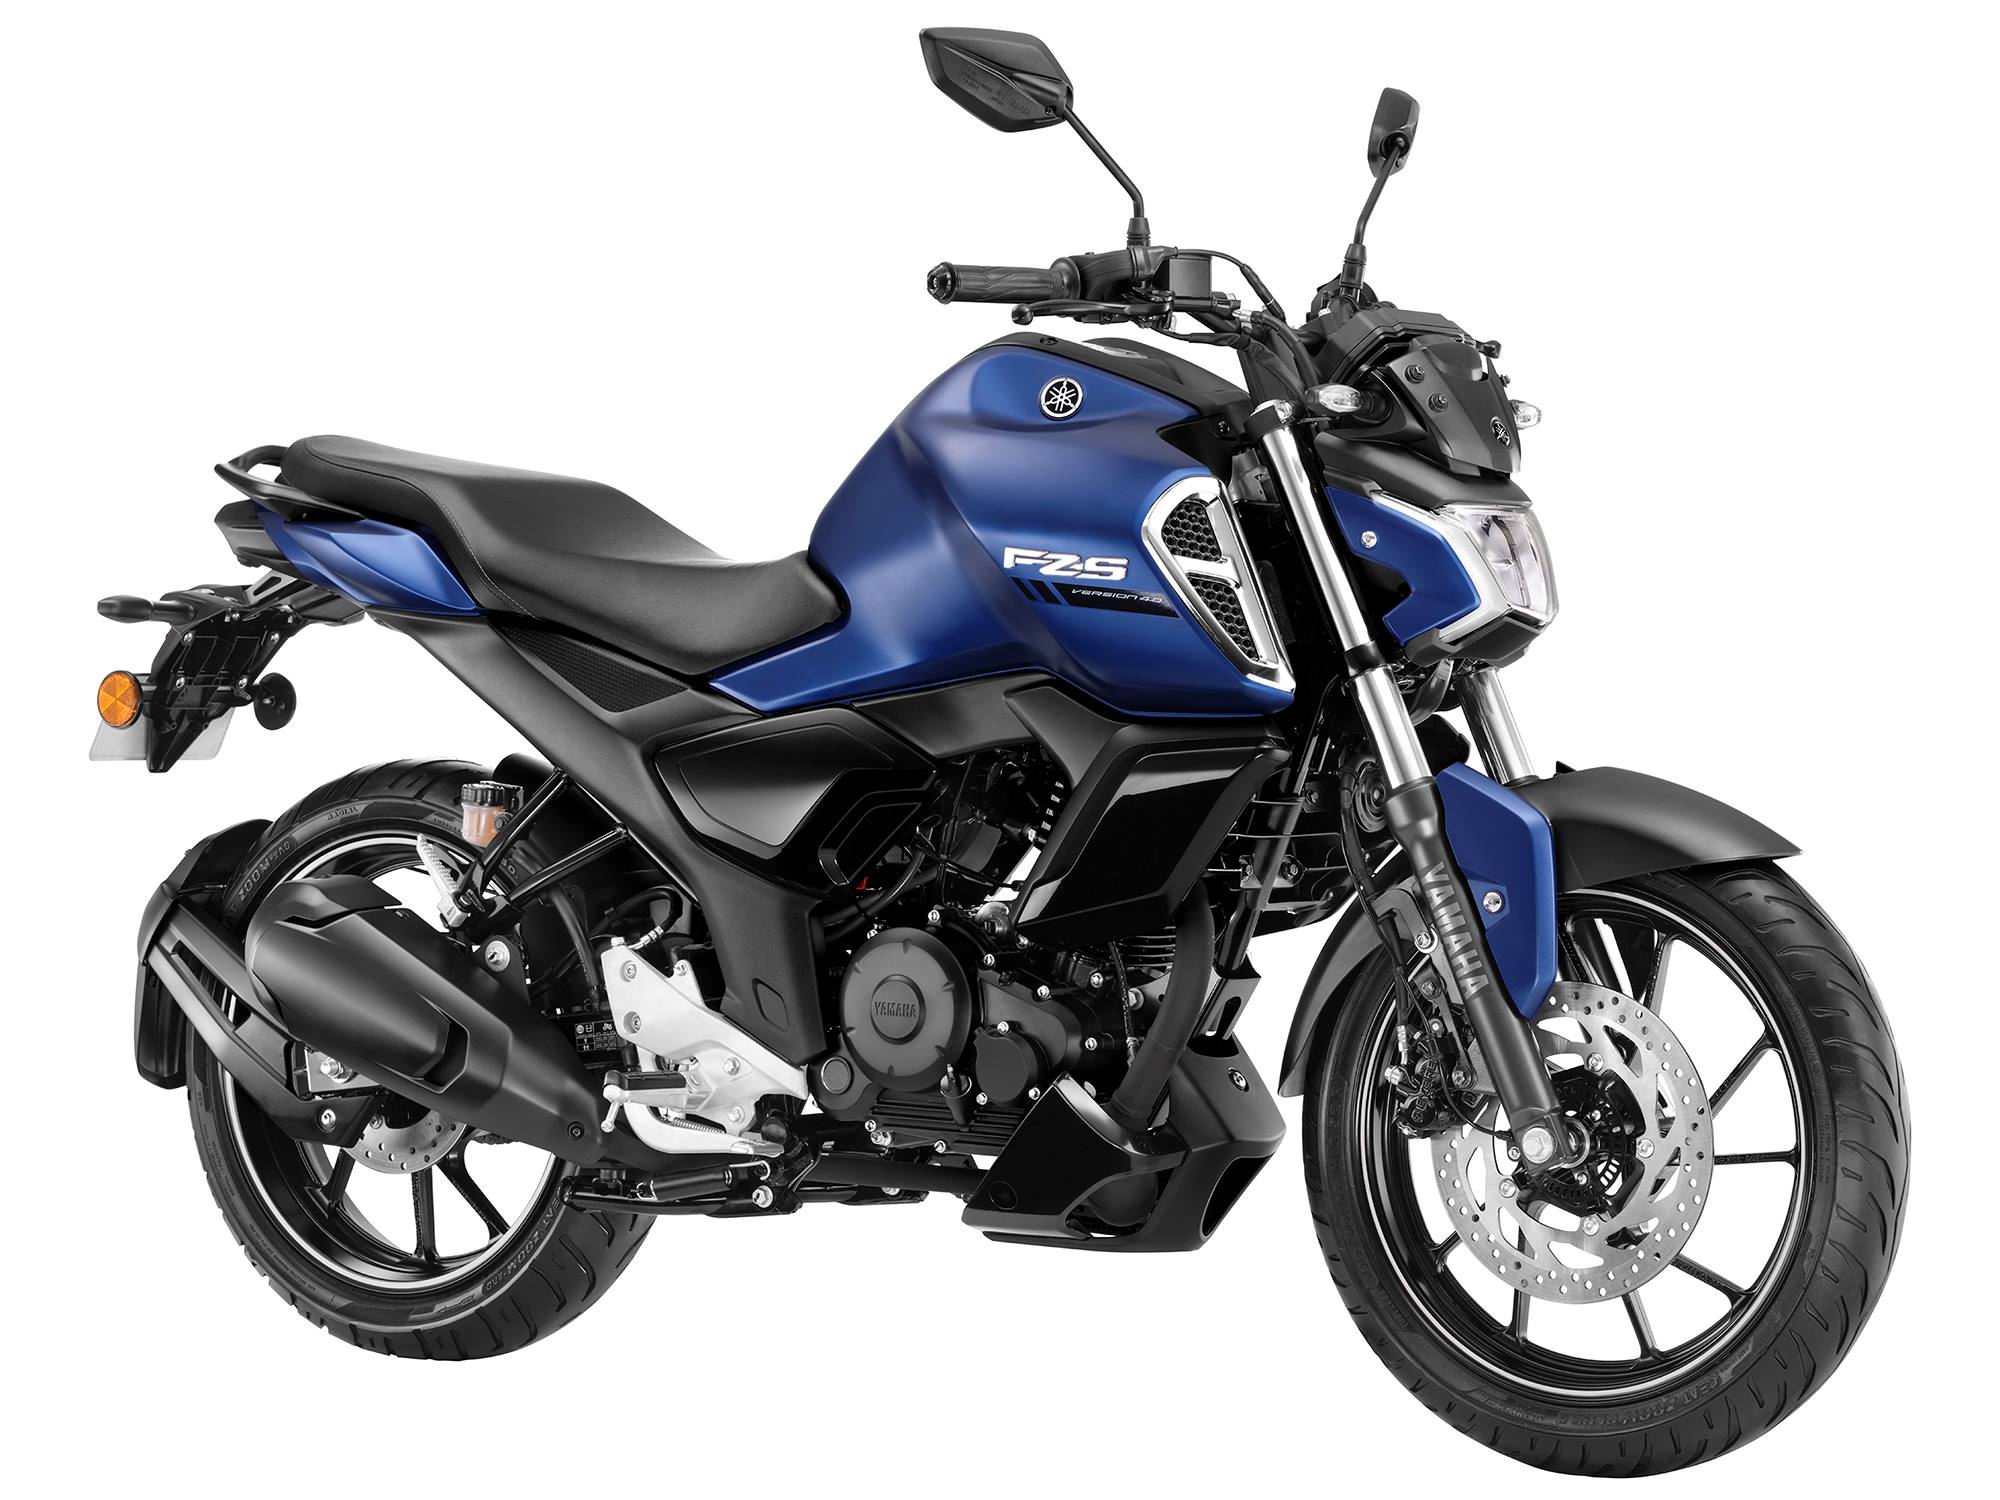 Yamaha FZ-S FI V4 launched in two new shades